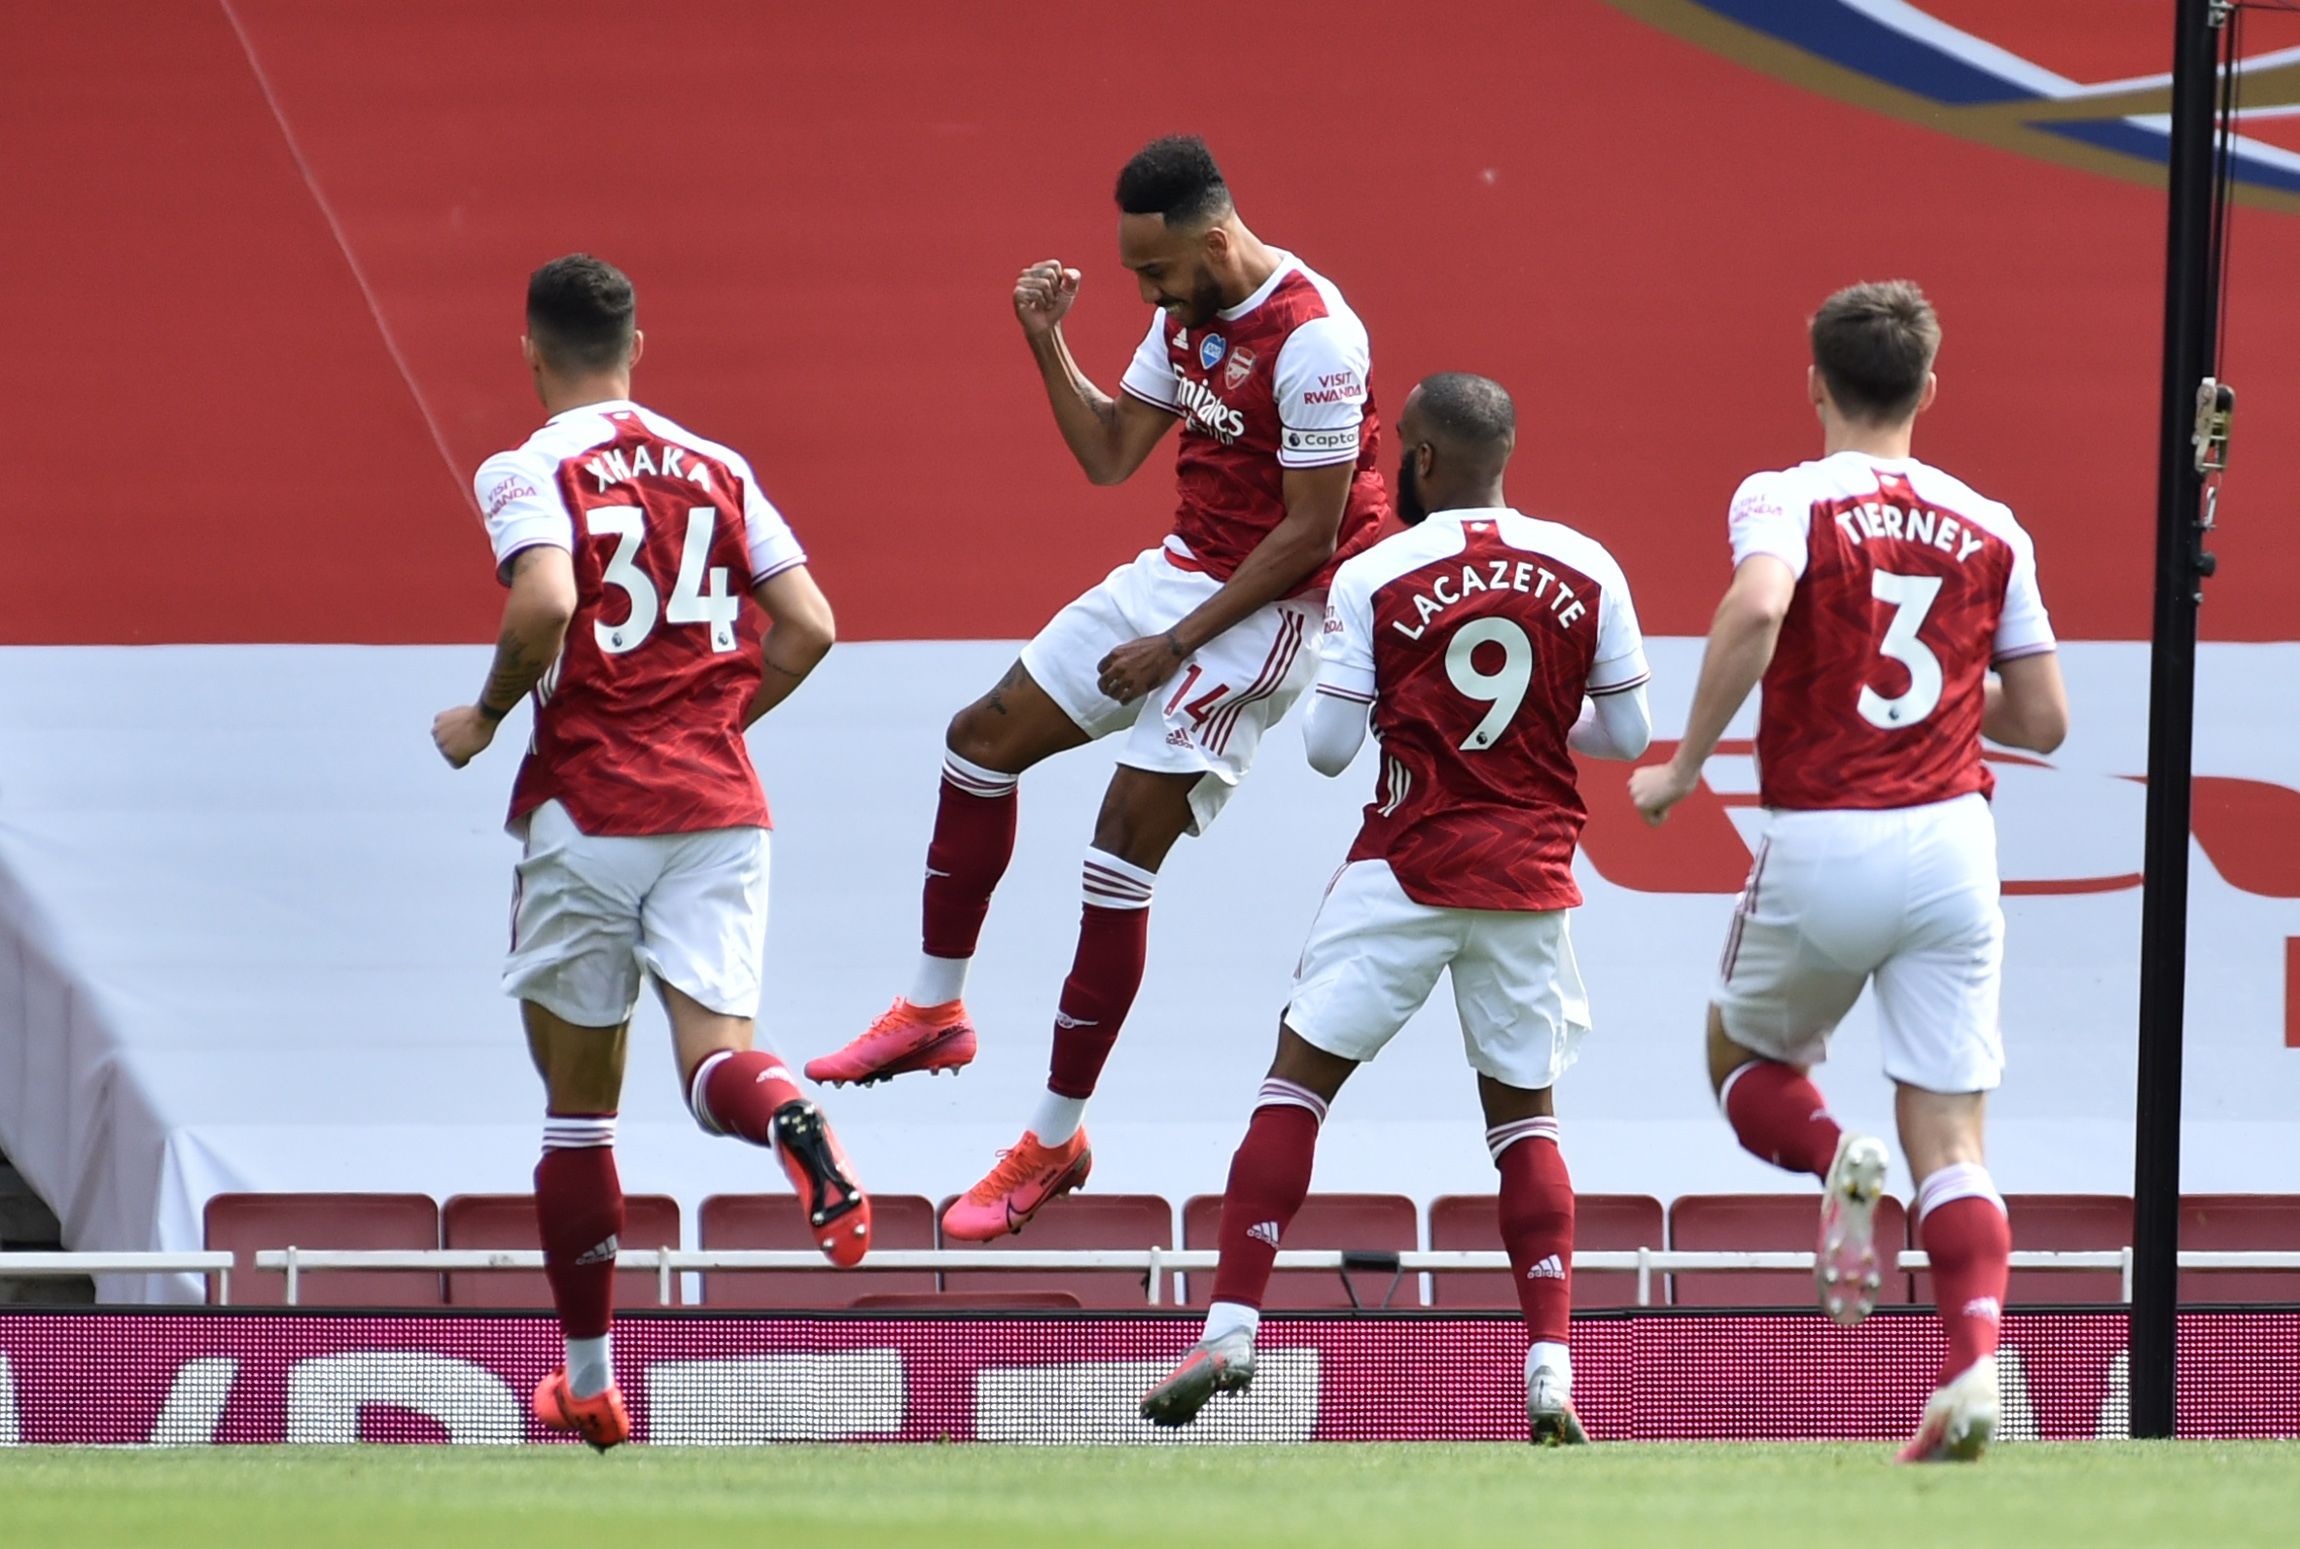 Soccer Football - Premier League - Arsenal v Watford - Emirates Stadium, London, Britain - July 26, 2020  Arsenal's Pierre-Emerick Aubameyang celebrates scoring their first goal with Alexandre Lacazette and teammates, as play resumes behind closed doors following the outbreak of the coronavirus disease (COVID-19) Pool via REUTERS/Rui Vieira EDITORIAL USE ONLY. No use with unauthorized audio, video, data, fixture lists, club/league logos or 'live' services. Online in-match use limited to 75 image